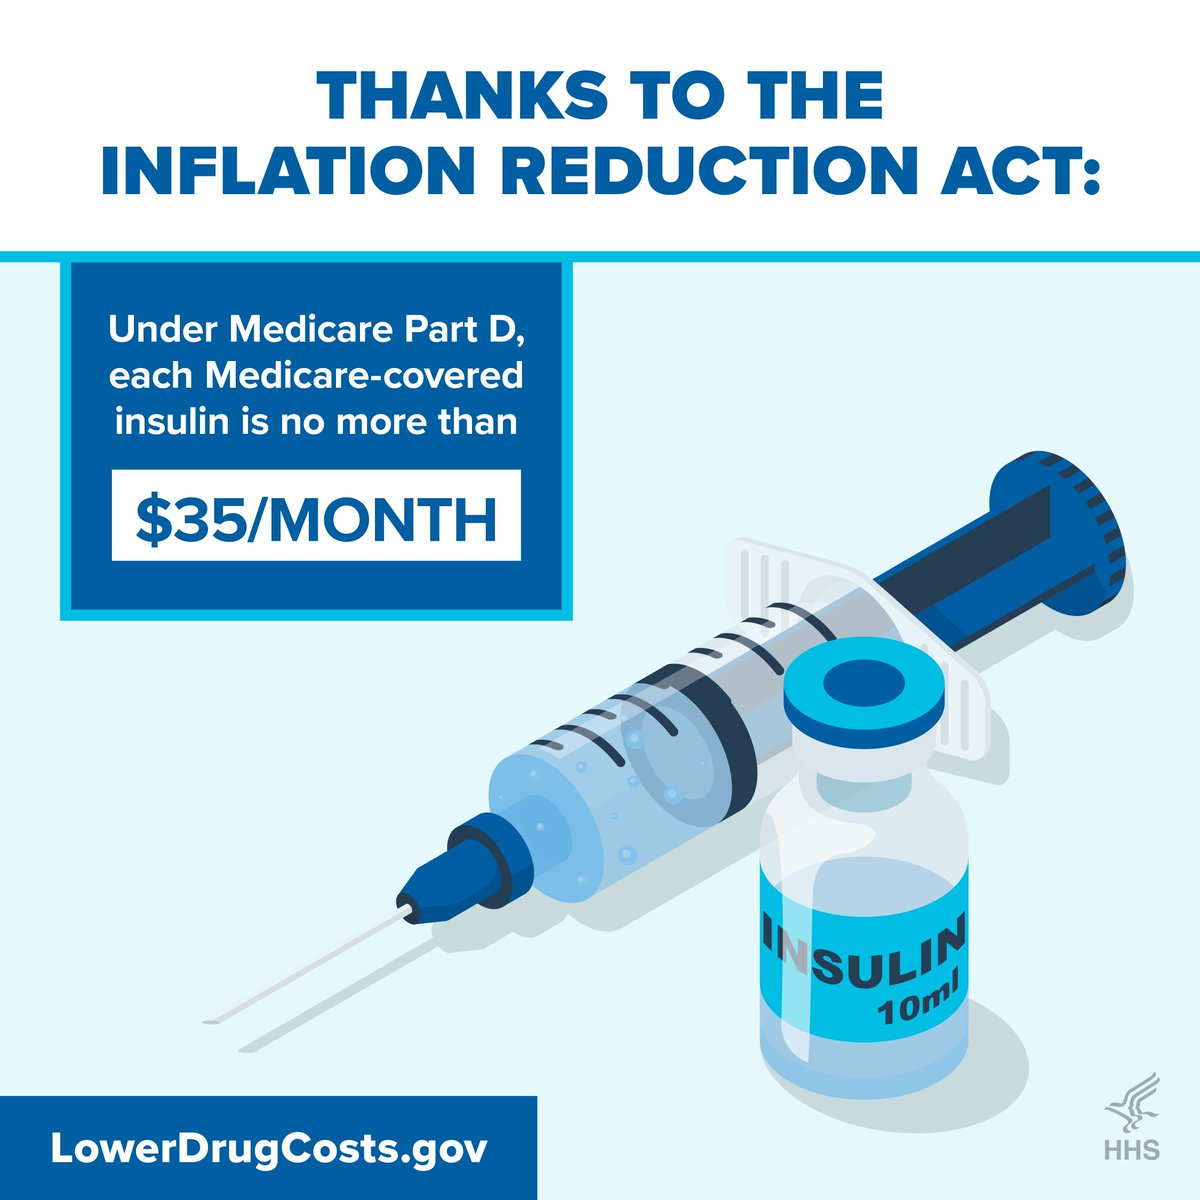 Medicare just got stronger! Changes to Part D mean improved access to affordable Rx drugs and $35/month cap on insulin costs. Health care equity is on the rise. 💉 #Medicare